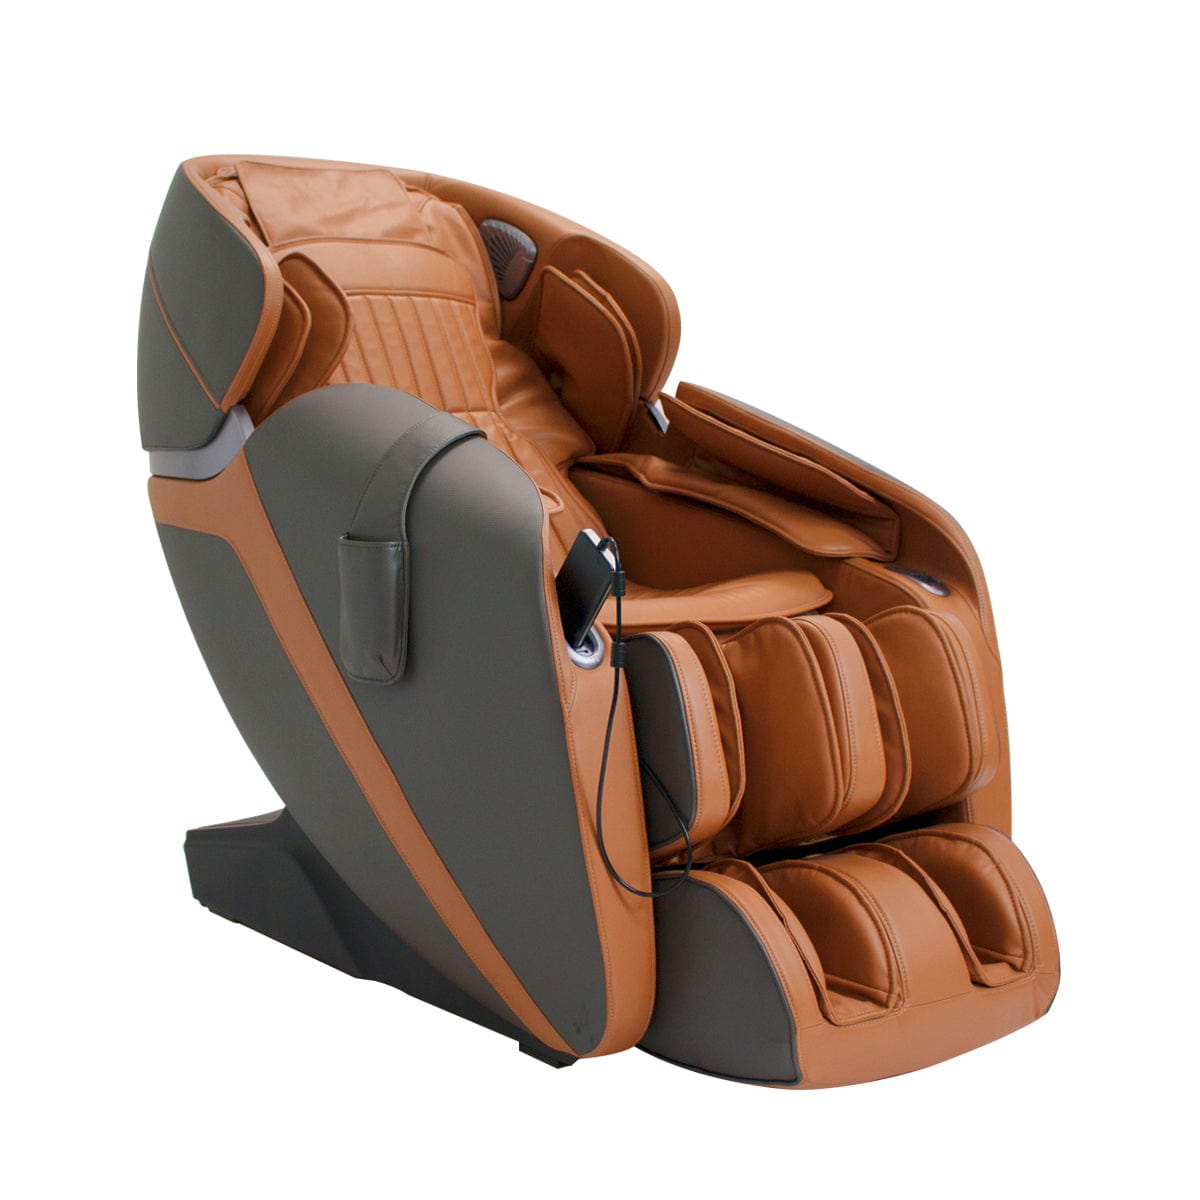 Kahuna Chair – LM-7000 [Red] - Massage Chair